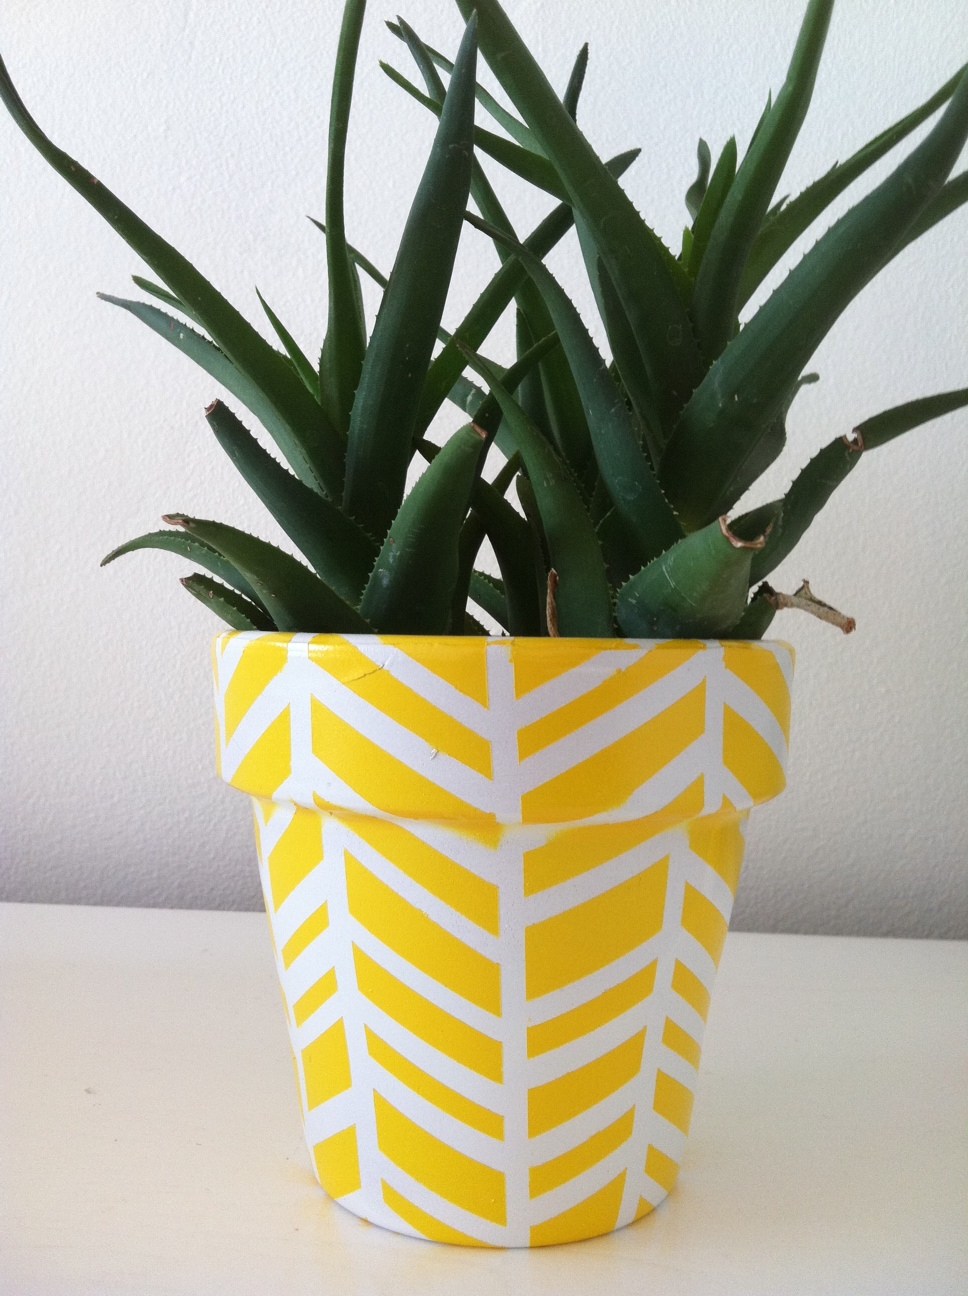 Beautify Your Home And Garden With These Awesome DIY Flower Pots - Hative